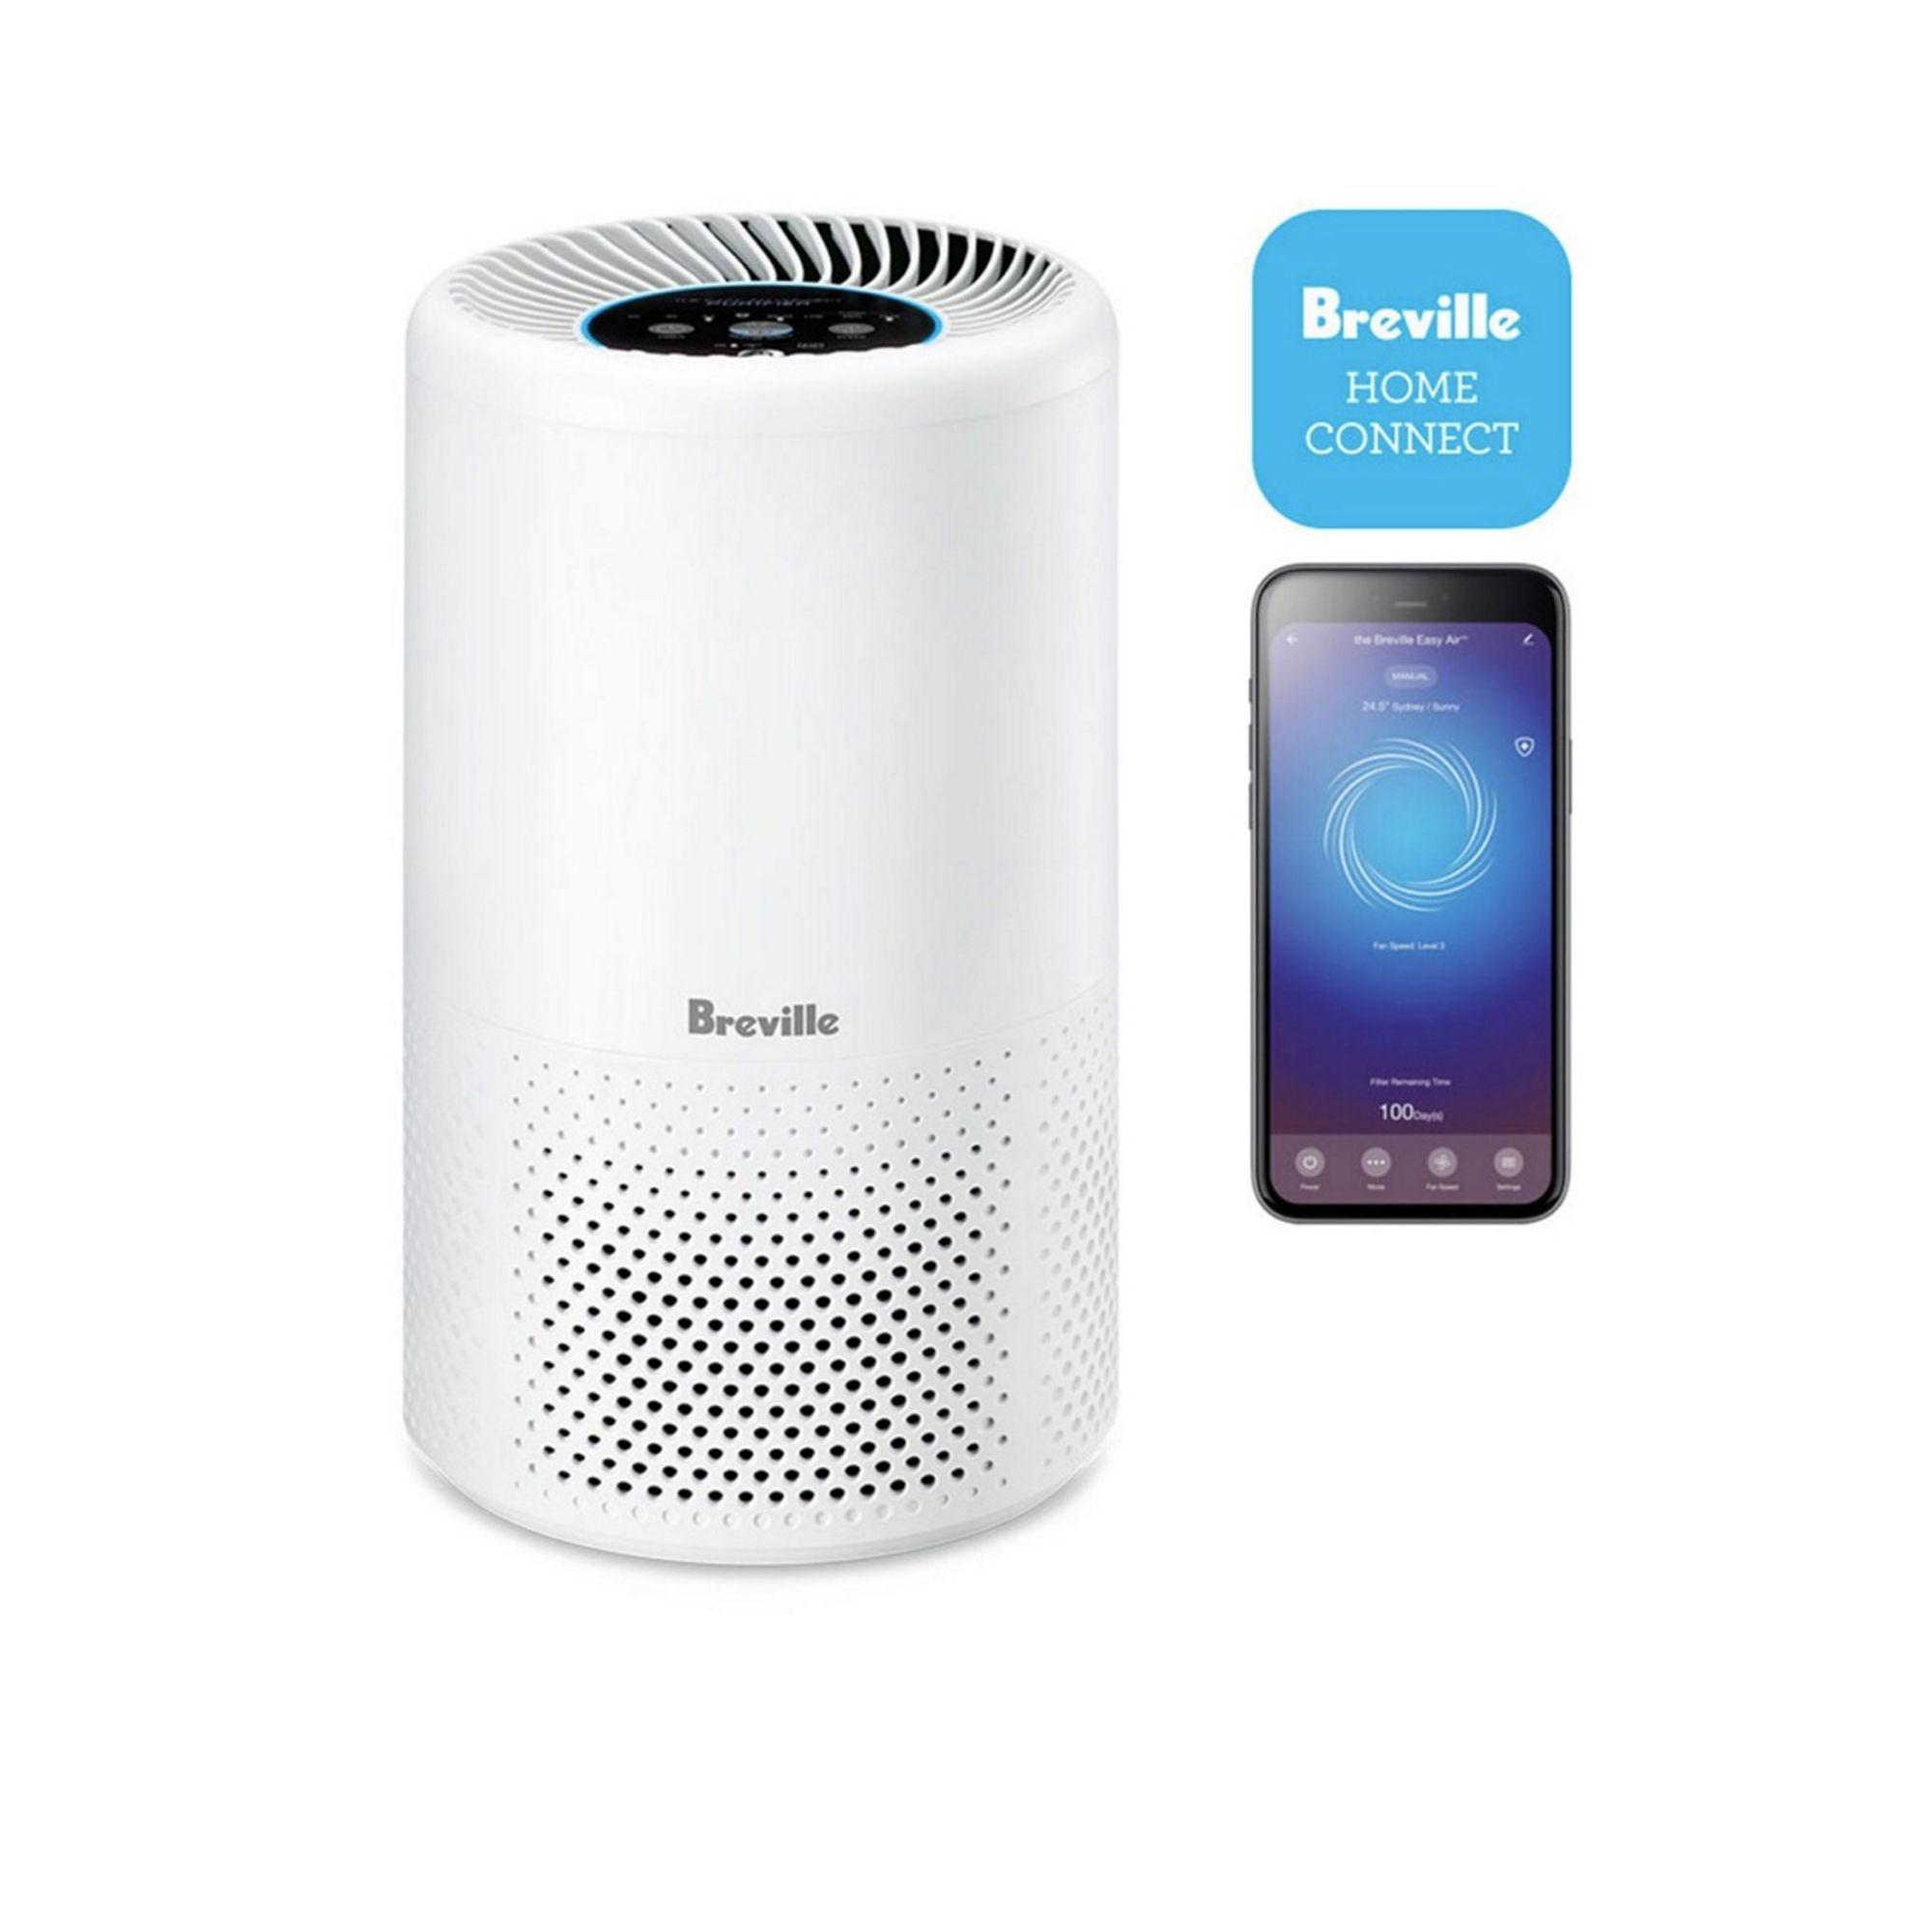 Breville The Easy Air Connect Purifier with Wi-Fi CADR 91m3/h Image 3